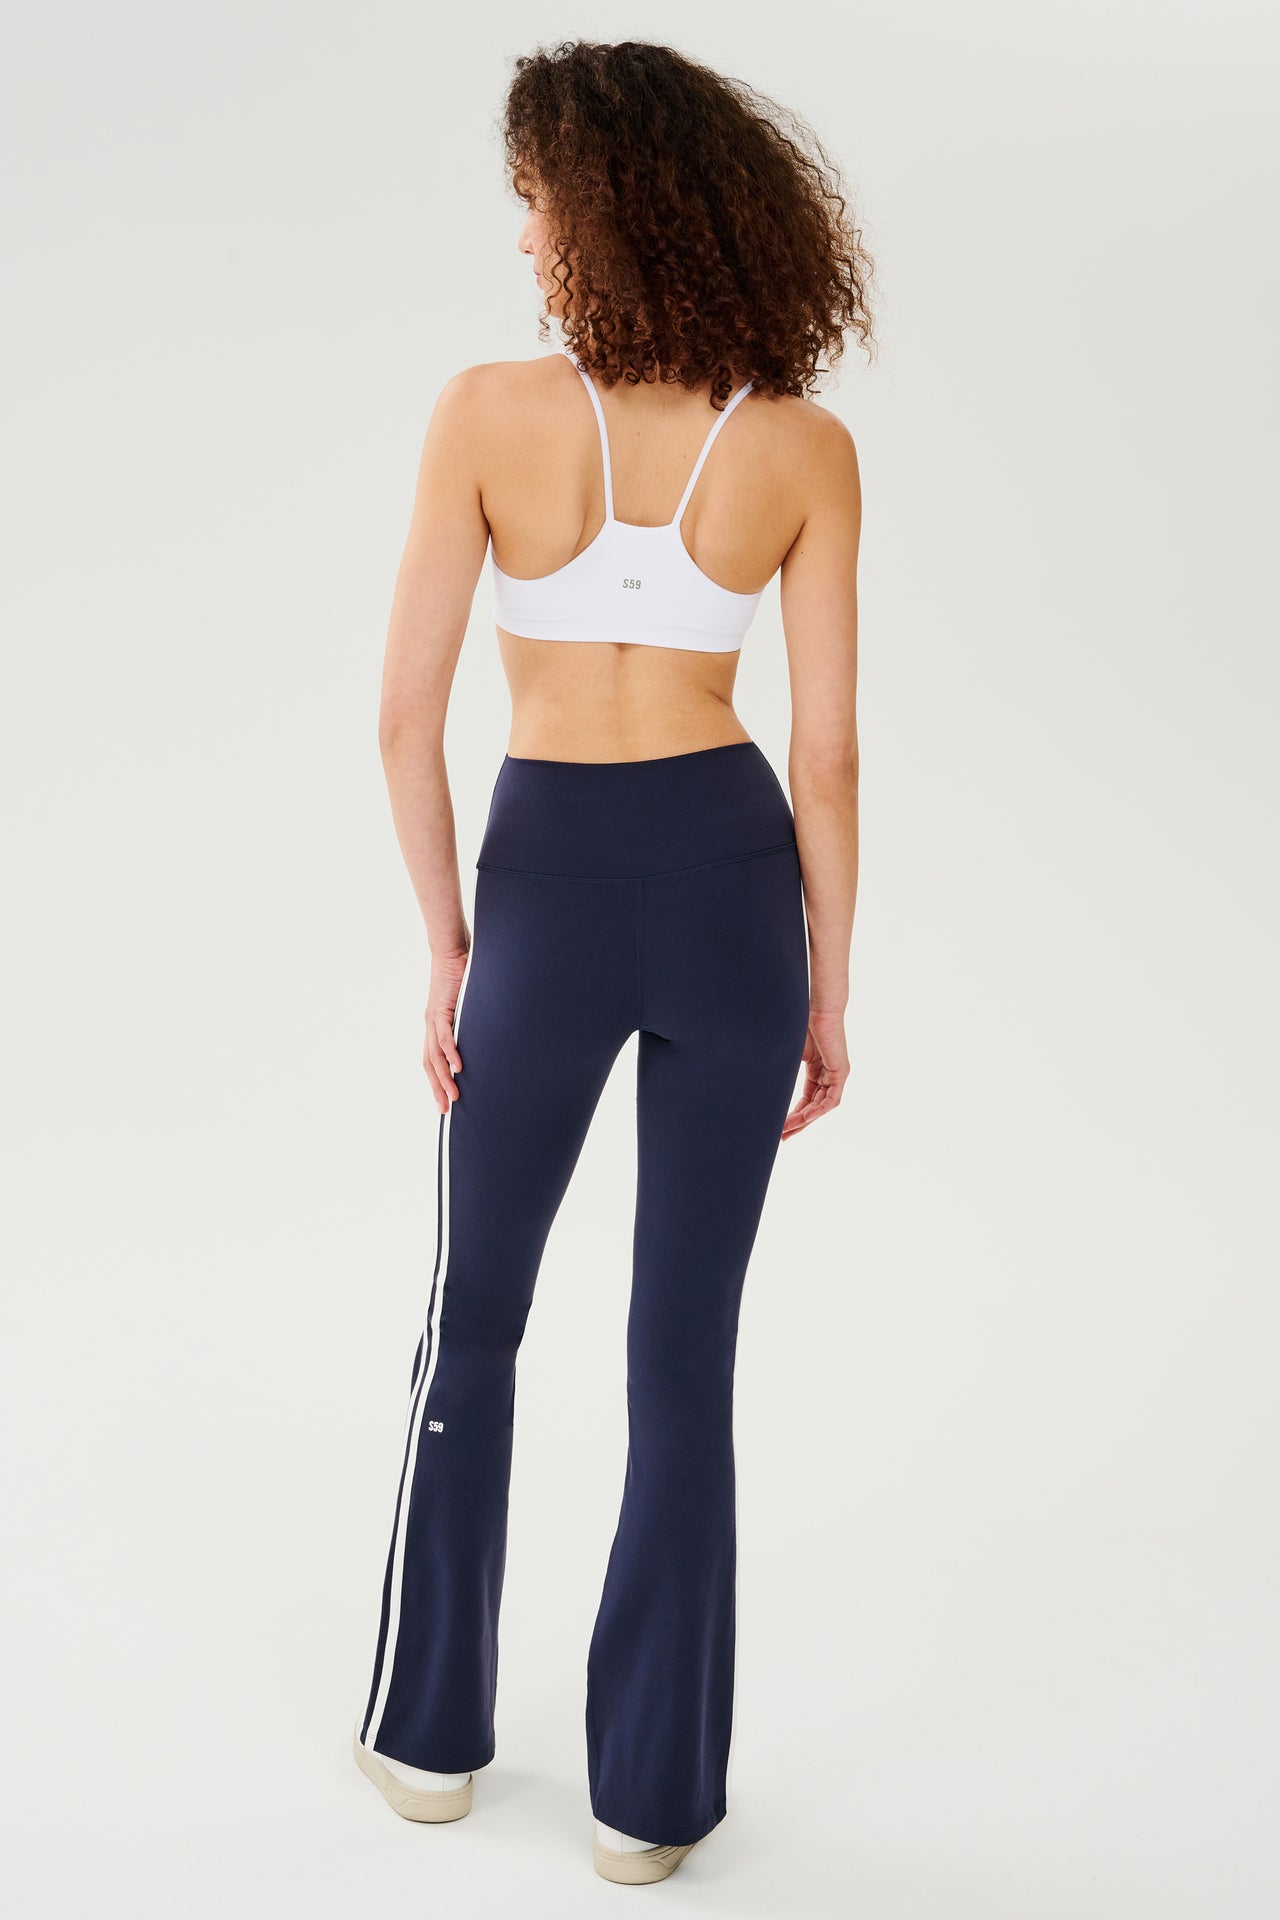 Full back view of woman with dark curly hair wearing dark blue high waist below ankle length legging with wide flared bottoms and white double side stripes and white racerback bra with spaghetti straps. Paired with white shoes. 